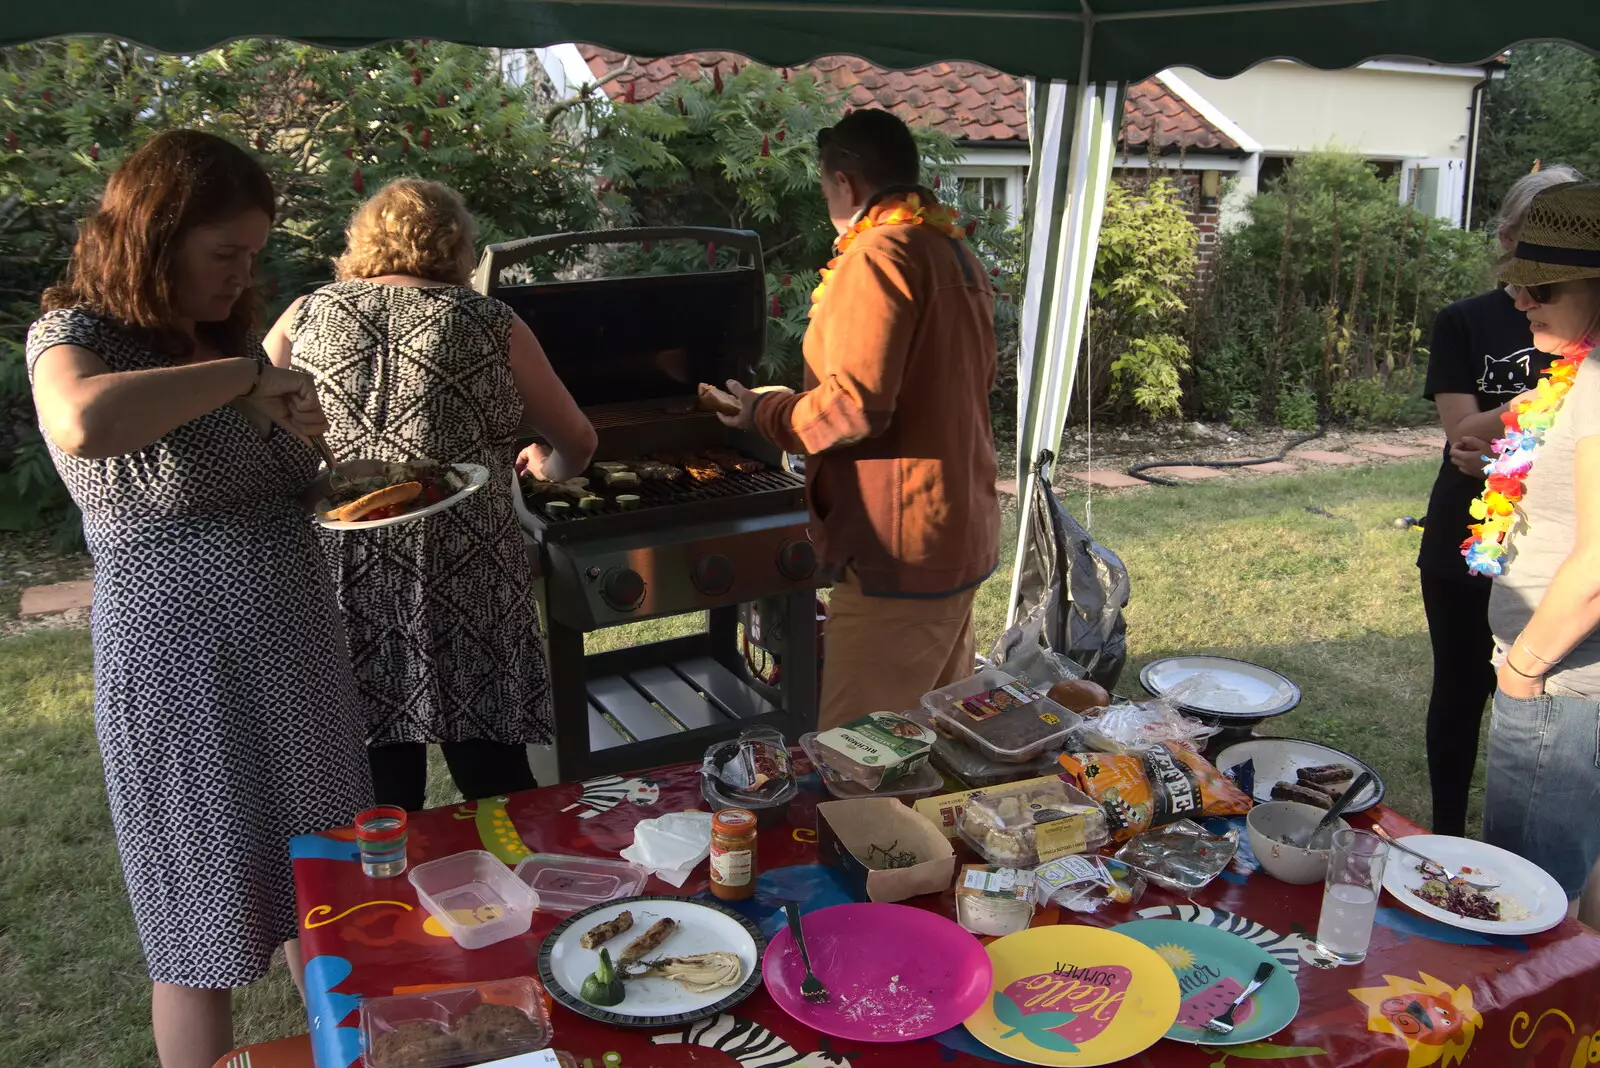 Clive's on barbeque duties, from Meg-fest, and Sean Visits, Bressingham and Brome, Suffolk - 1st August 2021